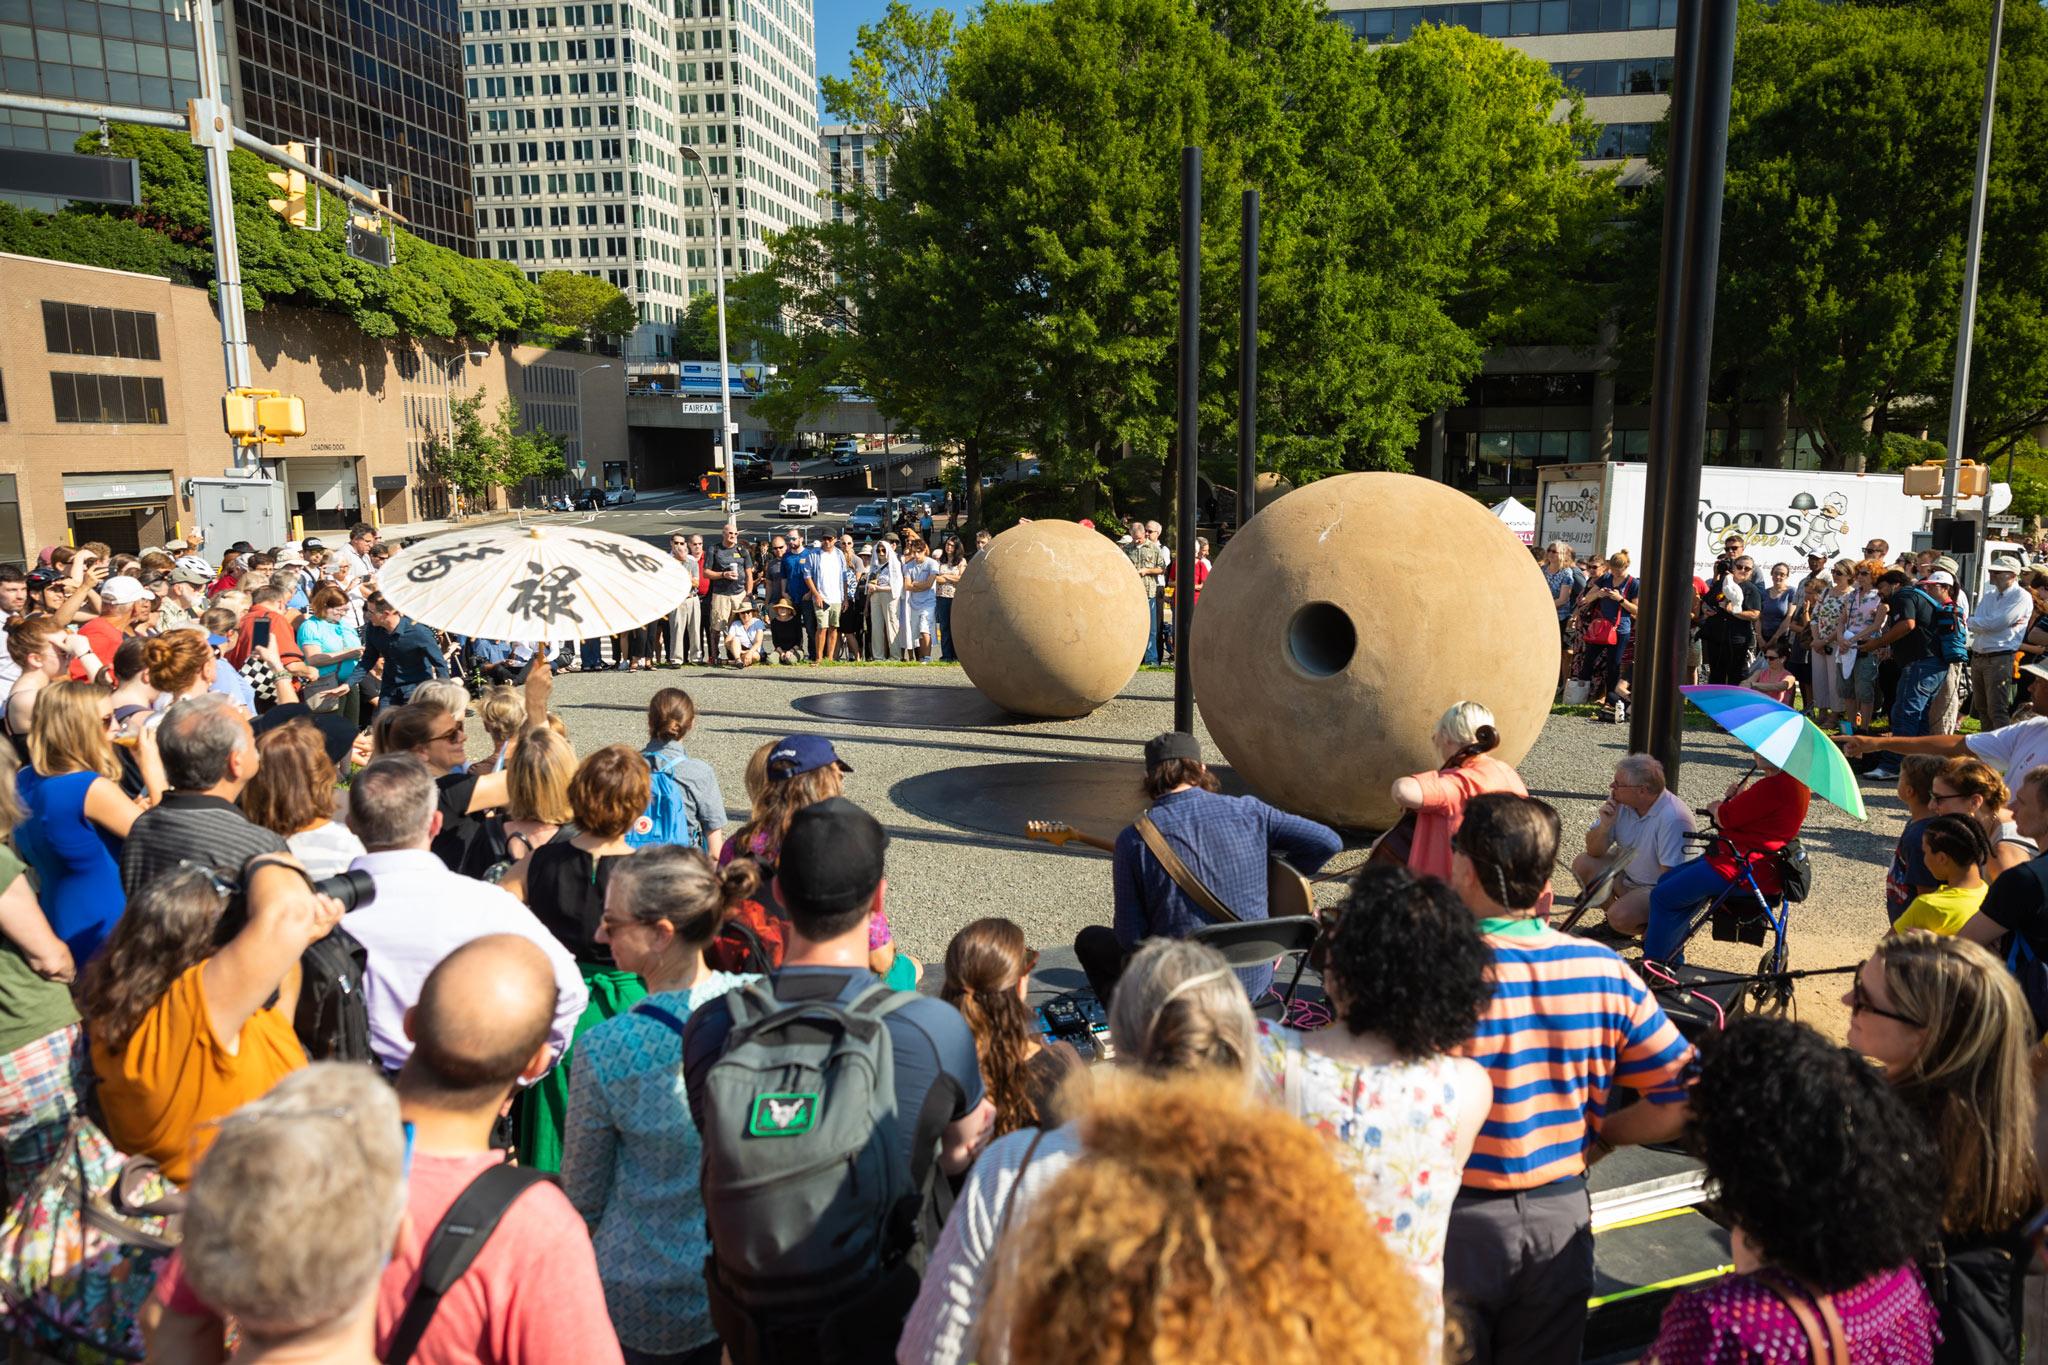 a large crowd gathered in an urban environment around two large concrete spheres